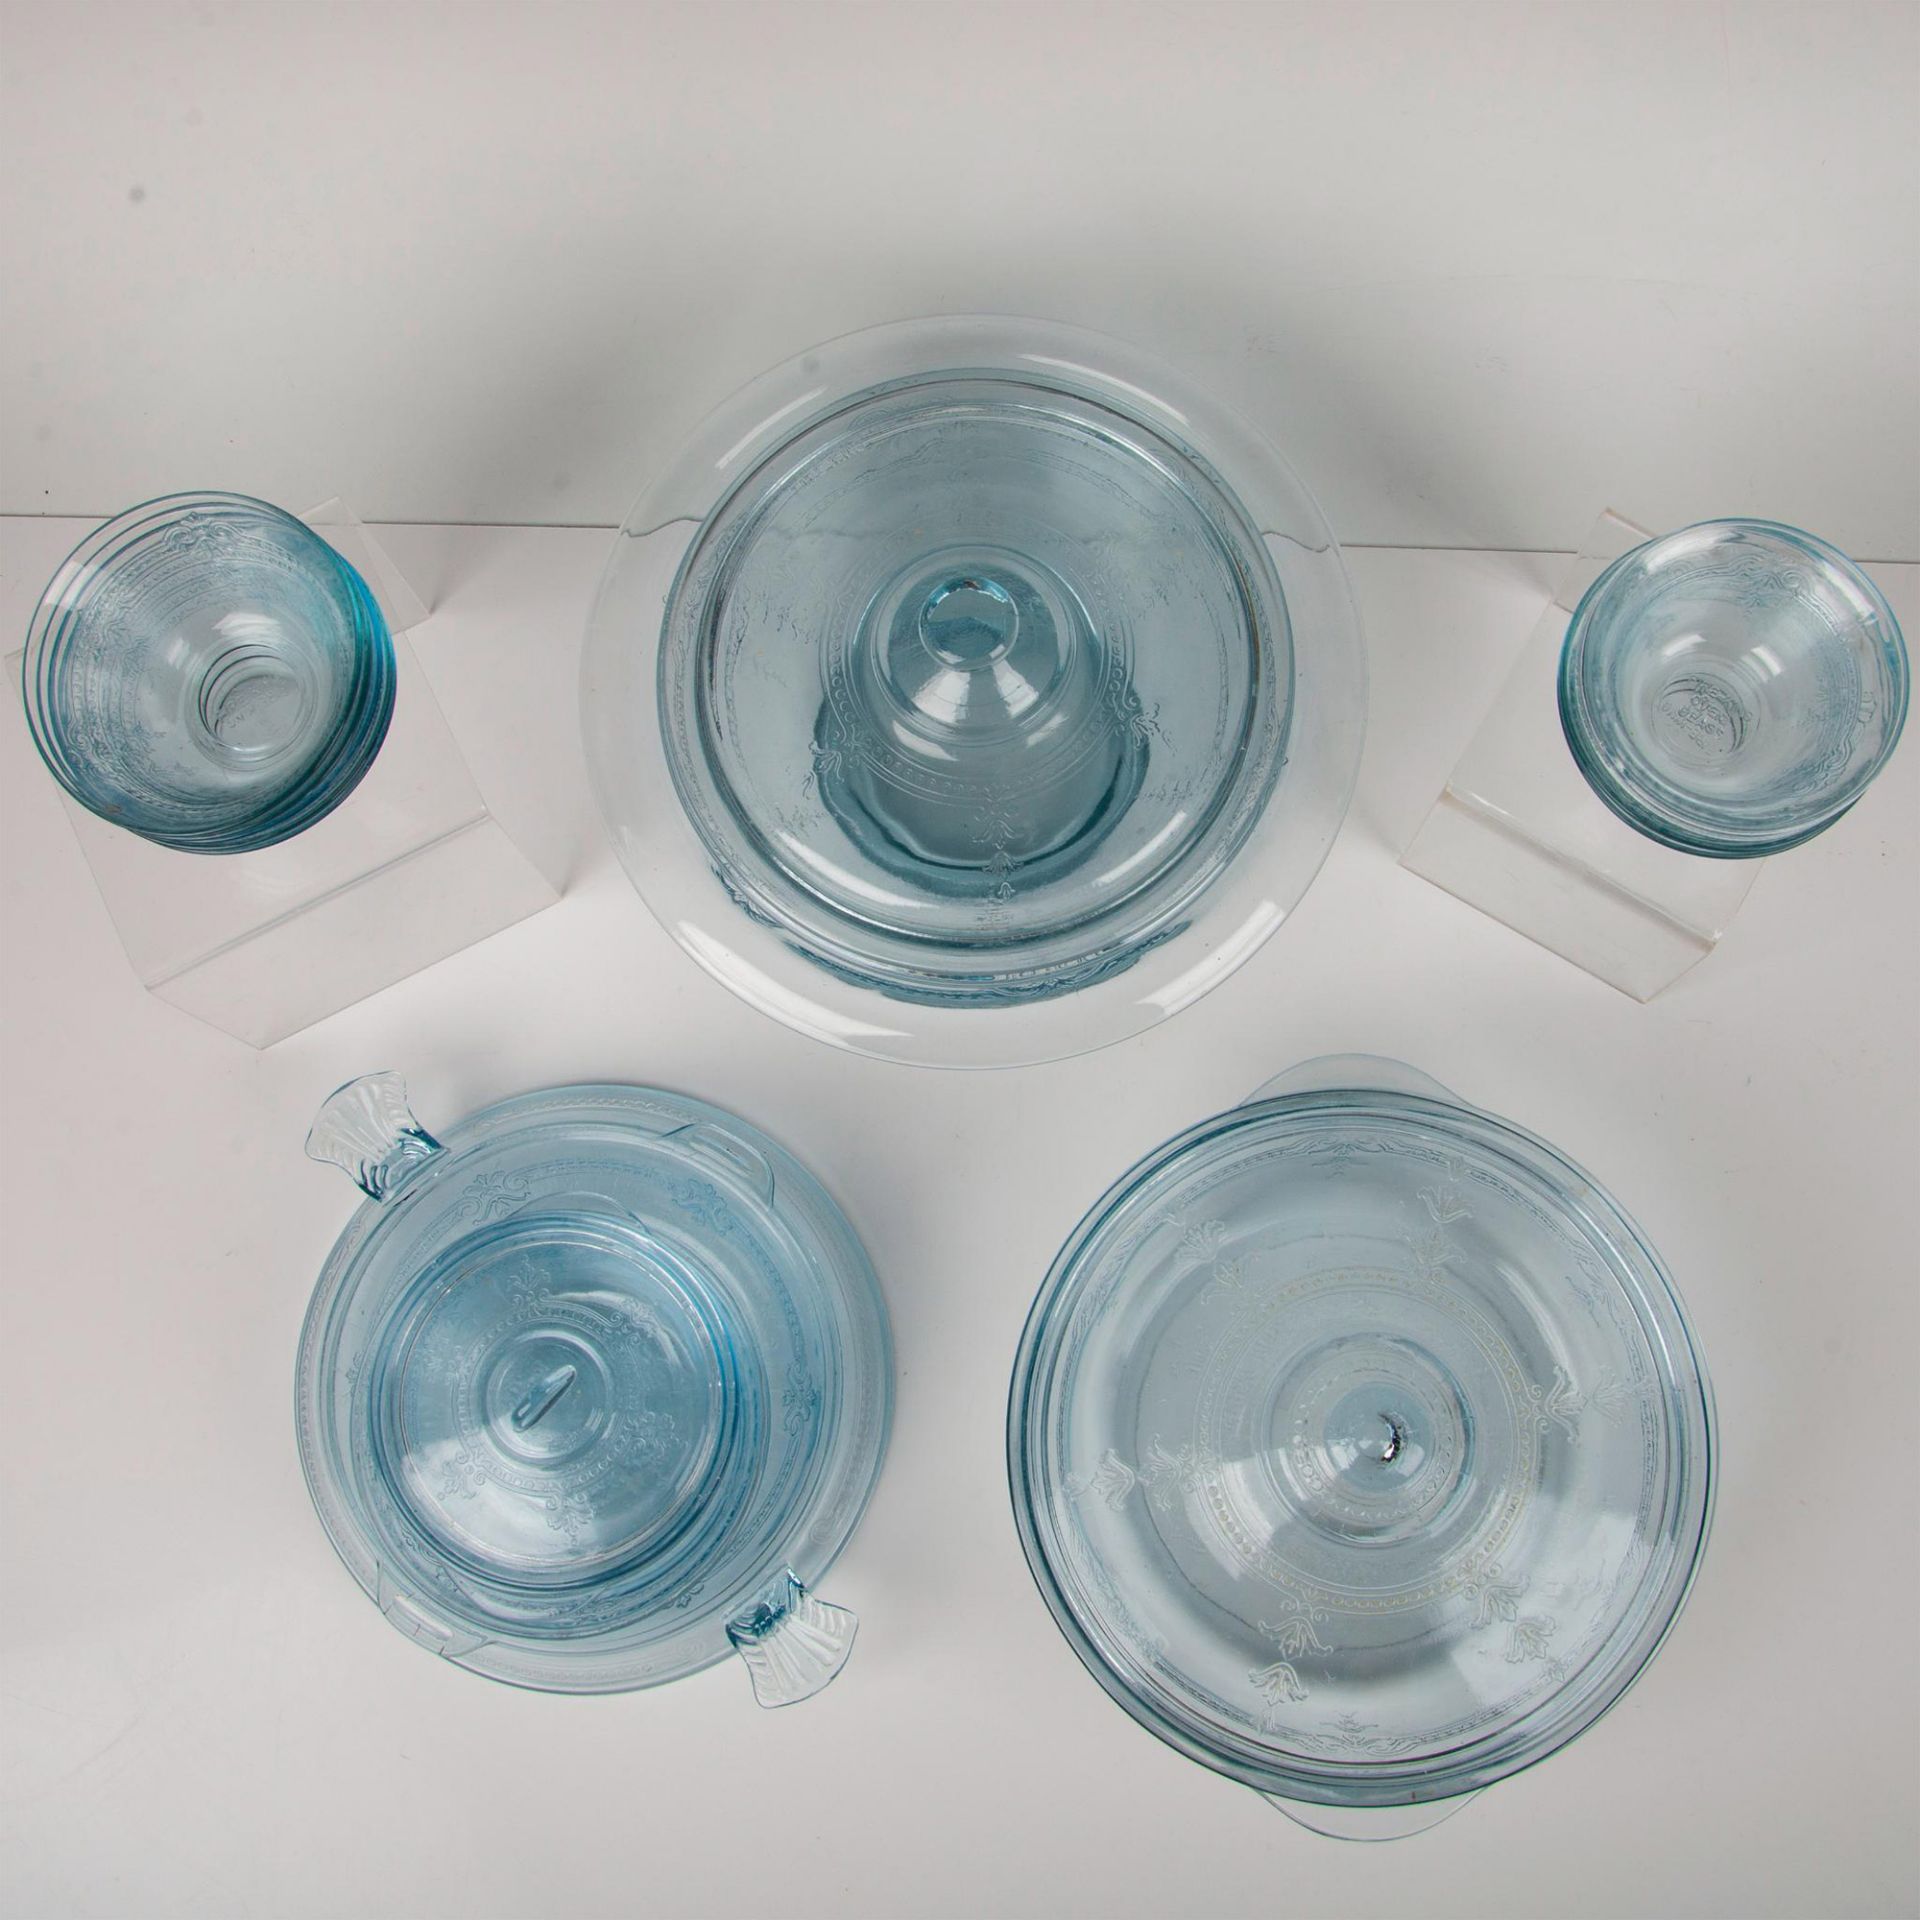 16pc Anchor Hocking Glass Kitchenware, Philbe Sapphire - Image 6 of 8